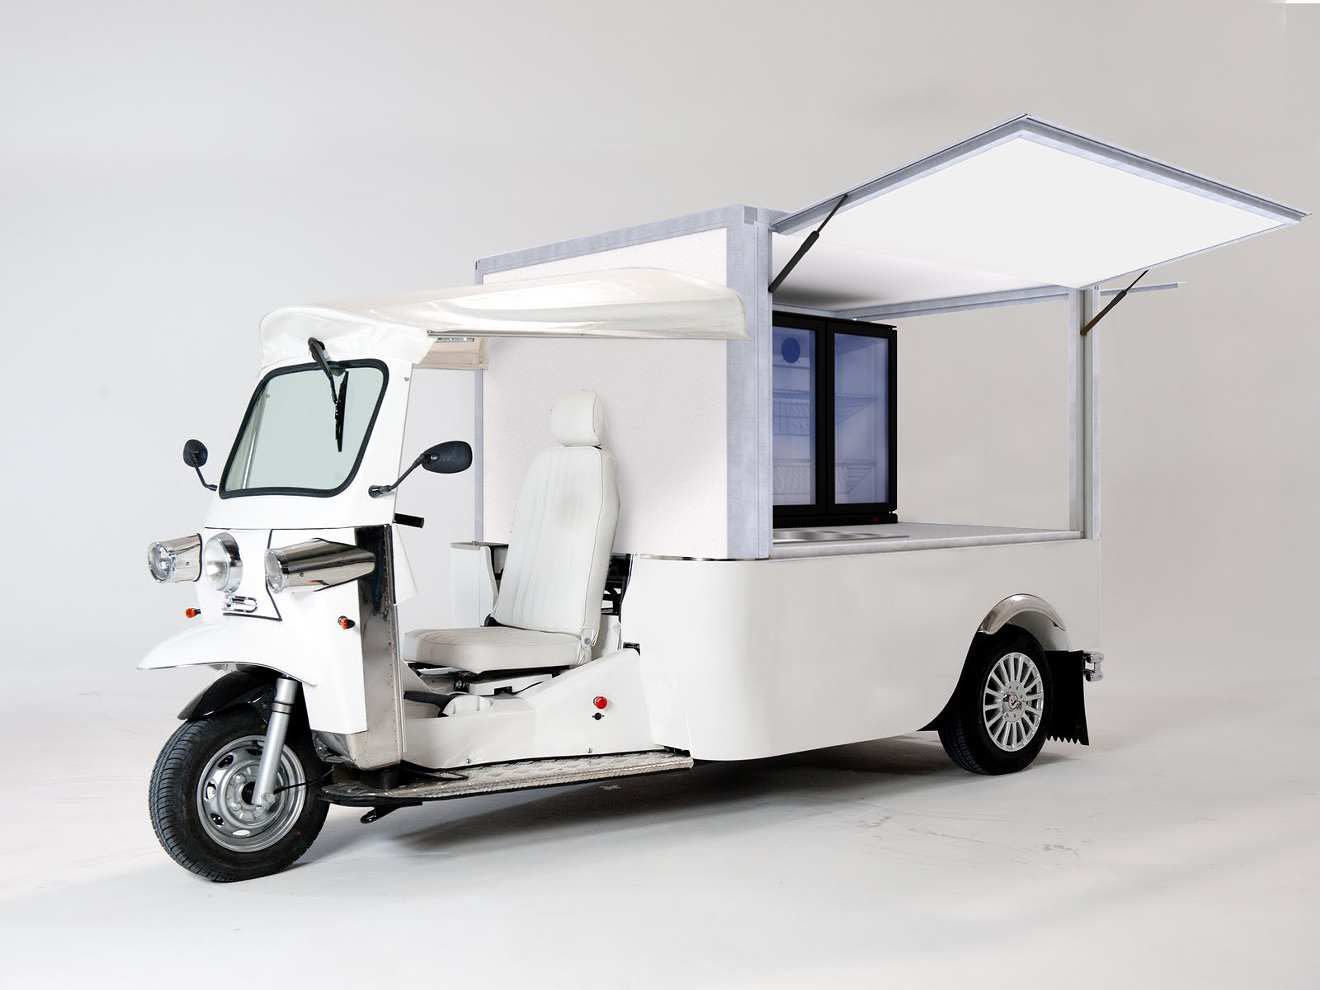 A branded version of this electric tuk tuk will serve at 8th Day's mobile coffee unit.